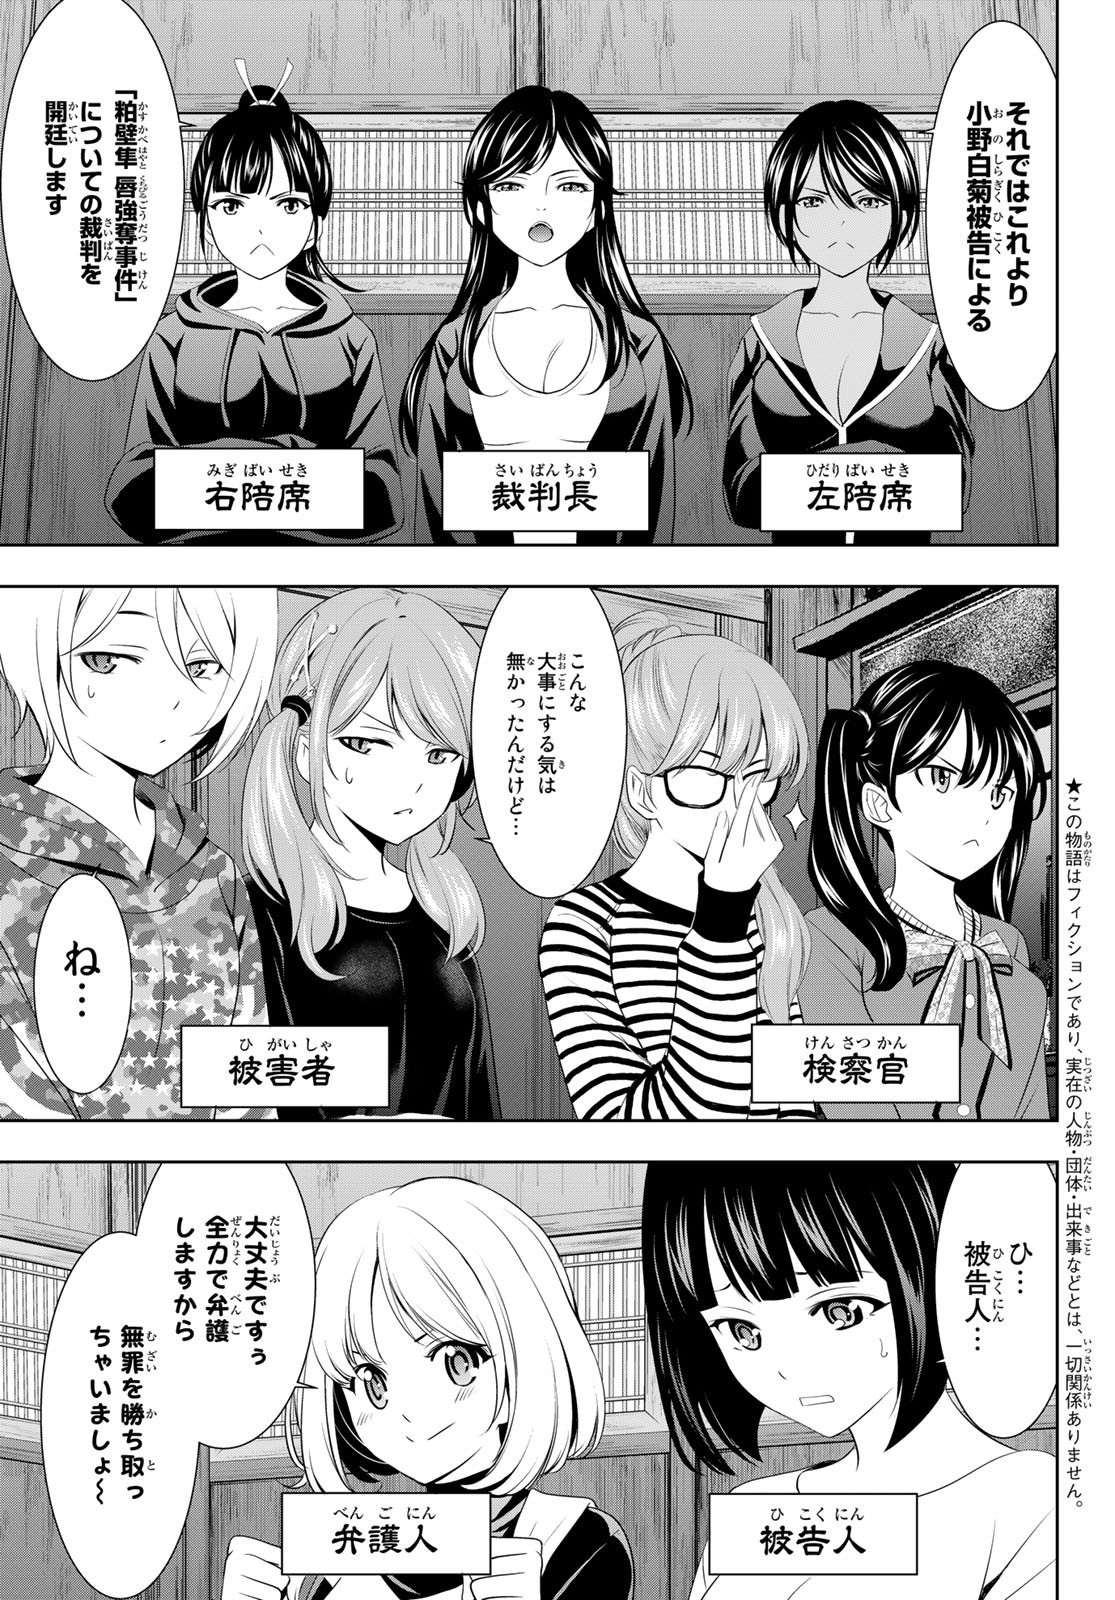 Goddess-Cafe-Terrace - Chapter 079 - Page 3